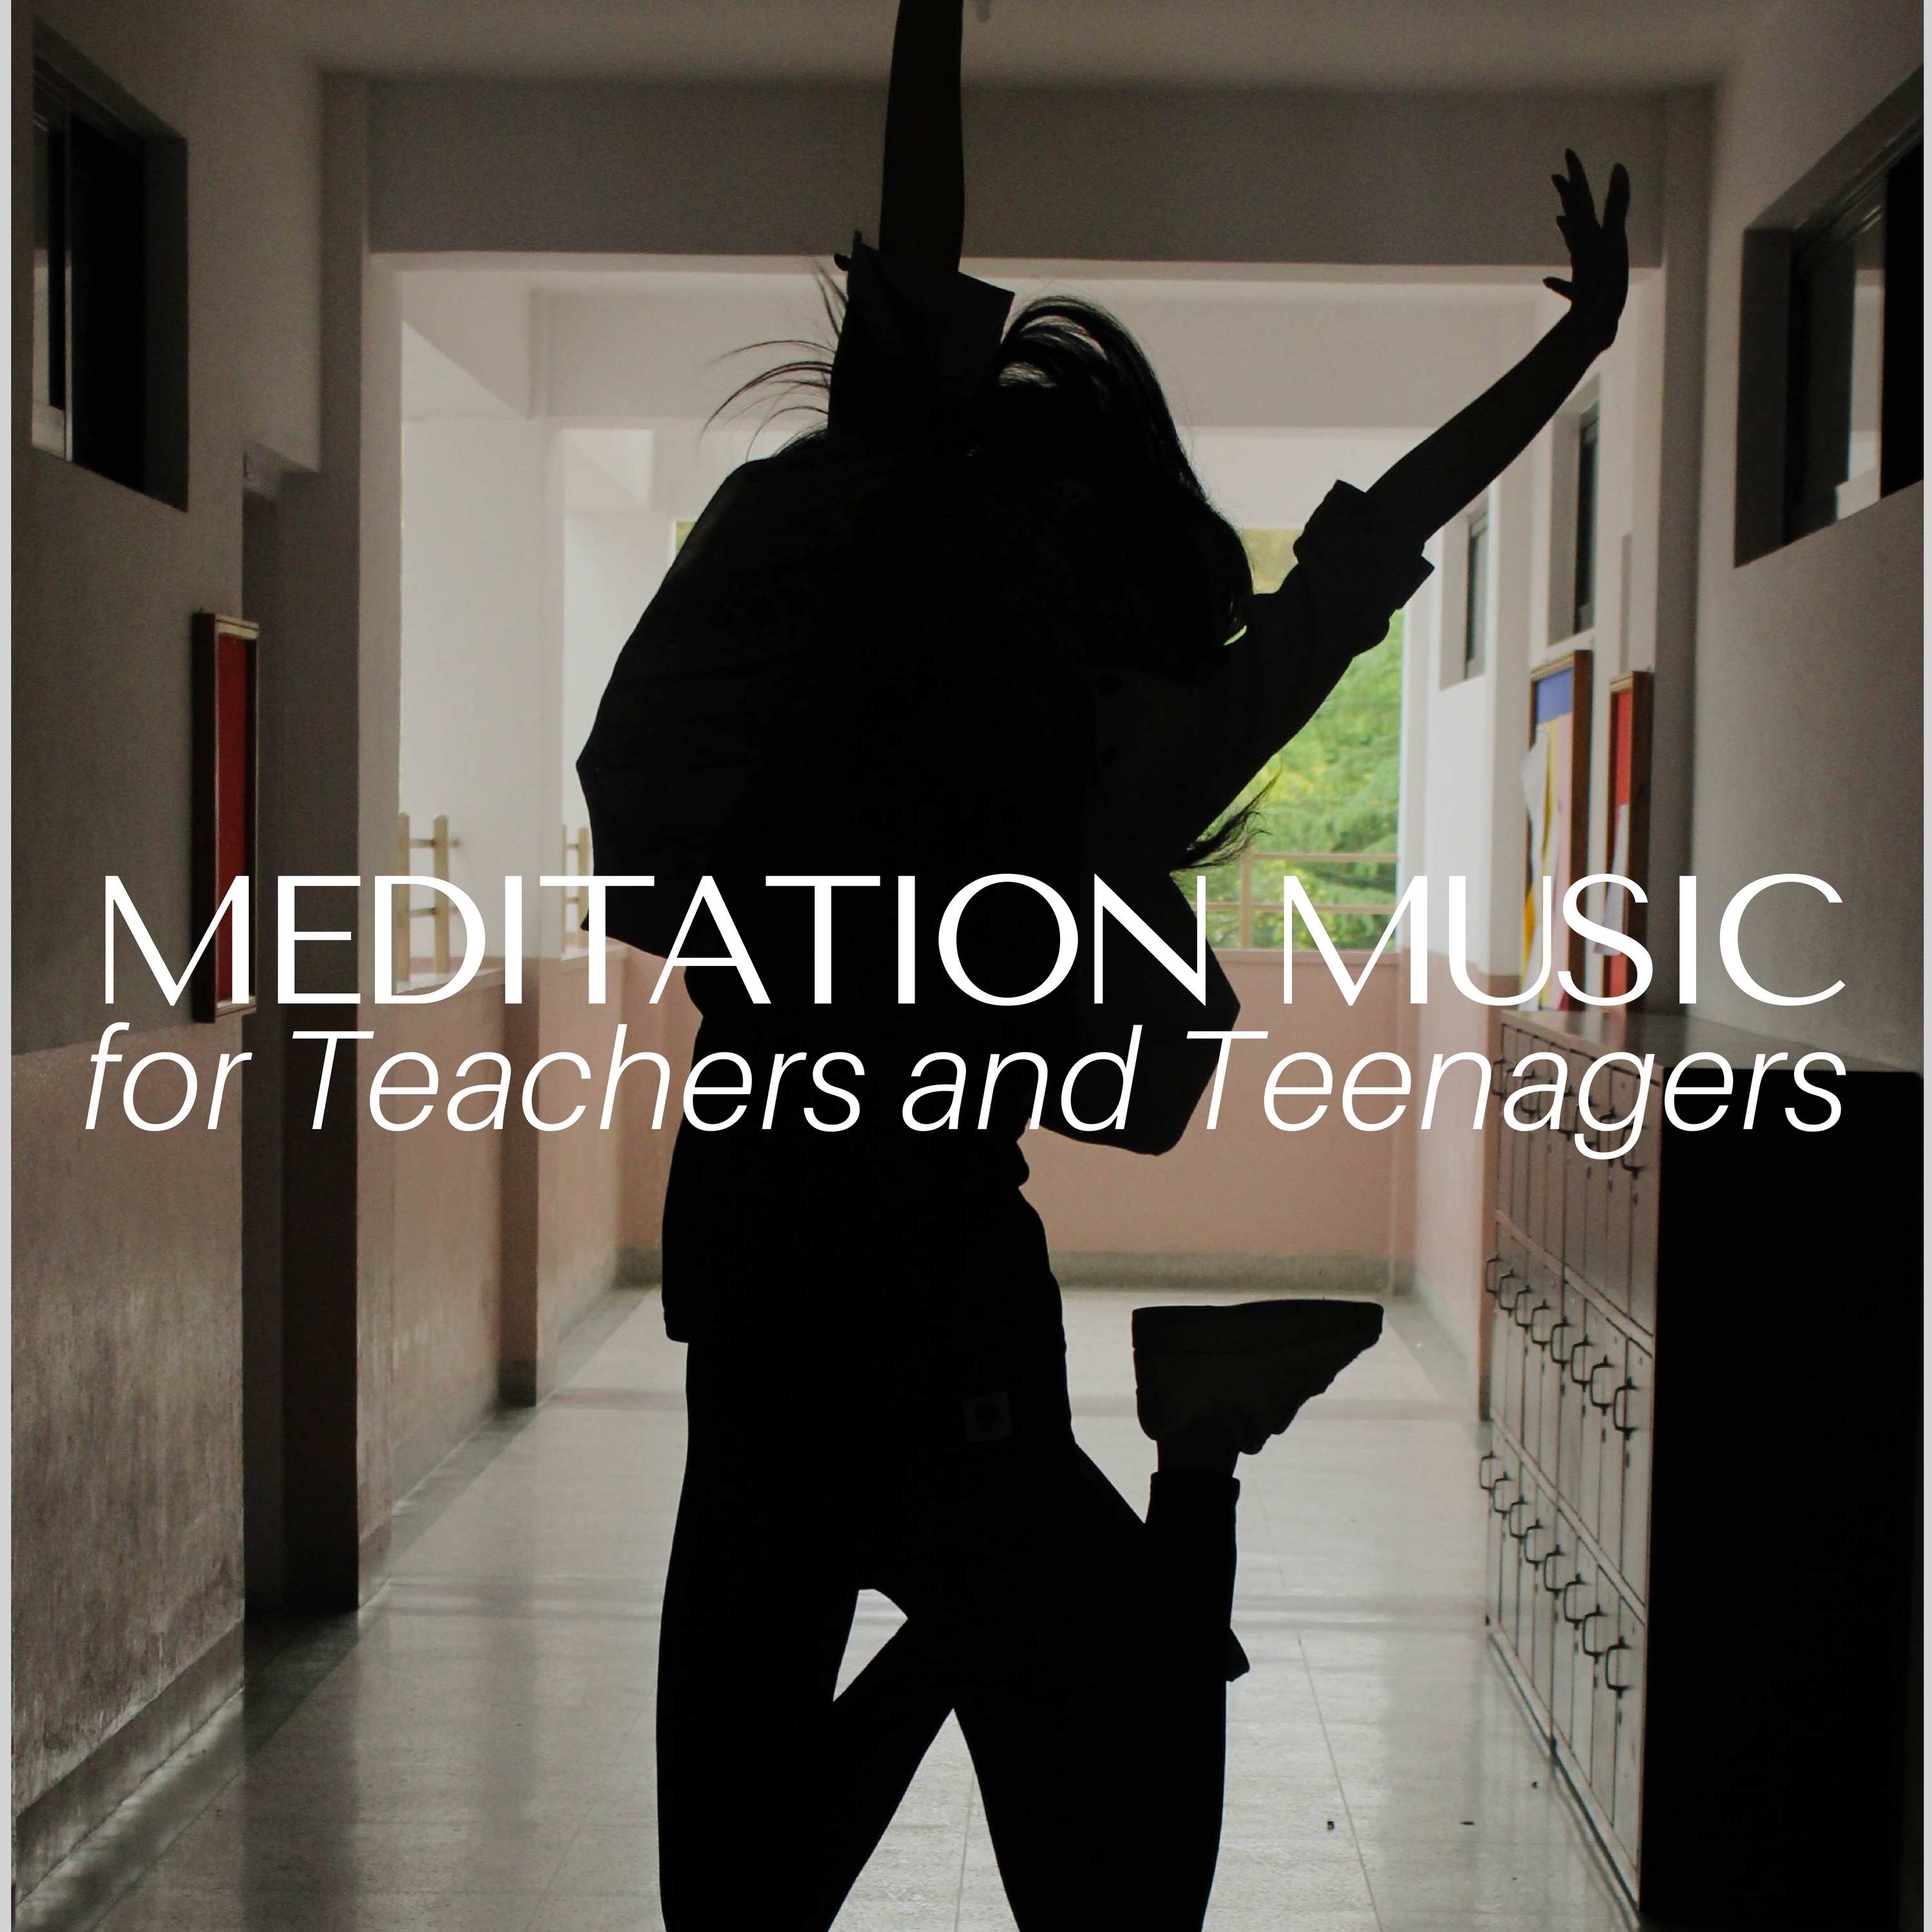 Meditation Music for Teachers and Teenagers to Fight Social Anxiety